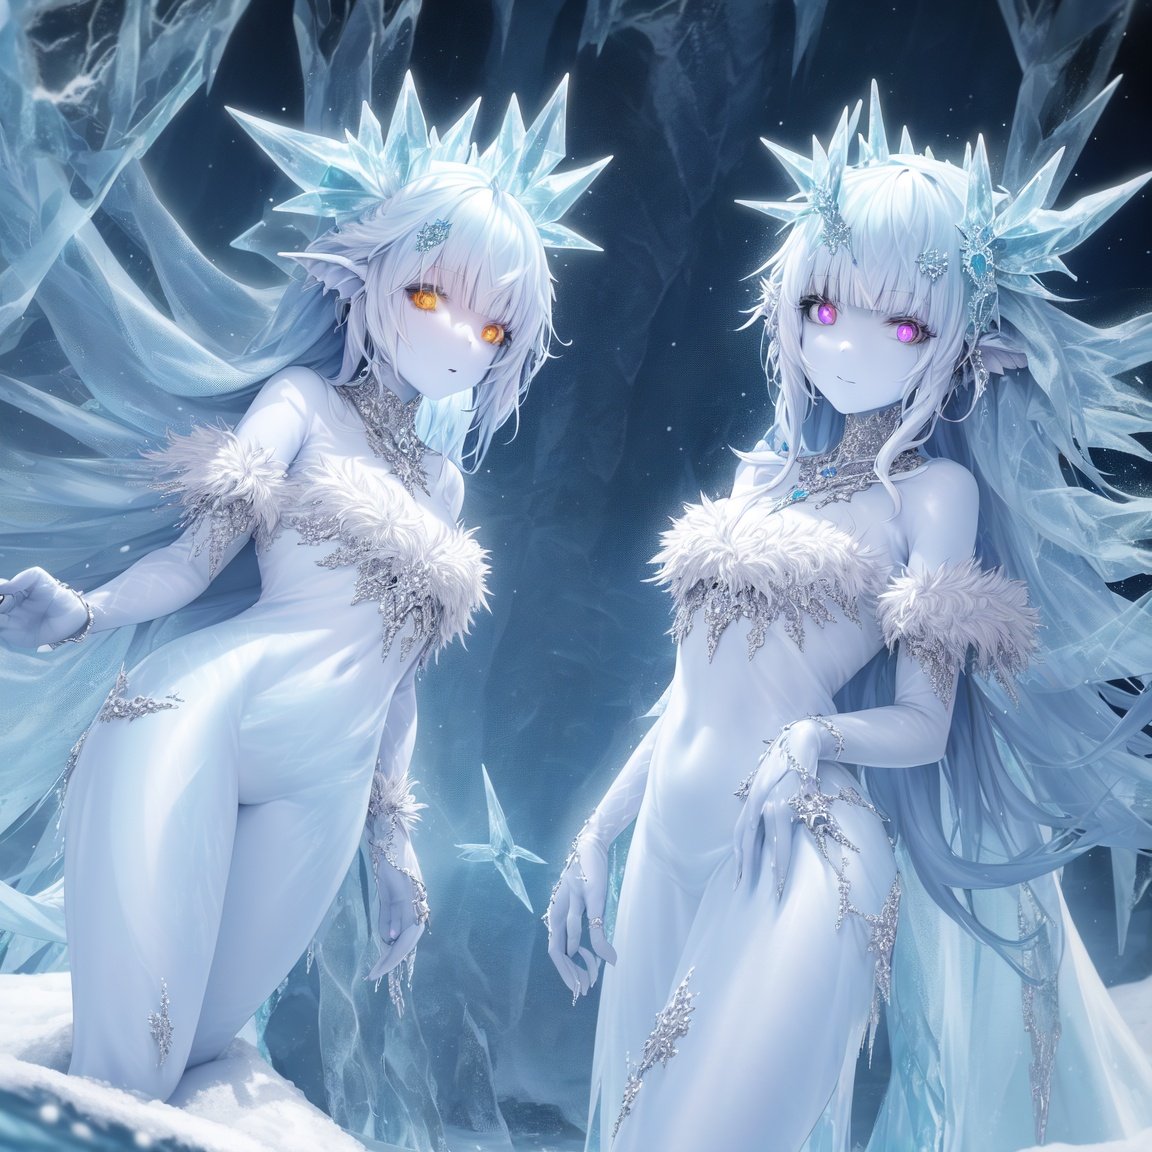 (monster girl make of ice sharps)++, (skin made of ice)+, (ice sharps)+, (translucent skin)++, (reflecting lights)+++, snowy forest, snowflakes